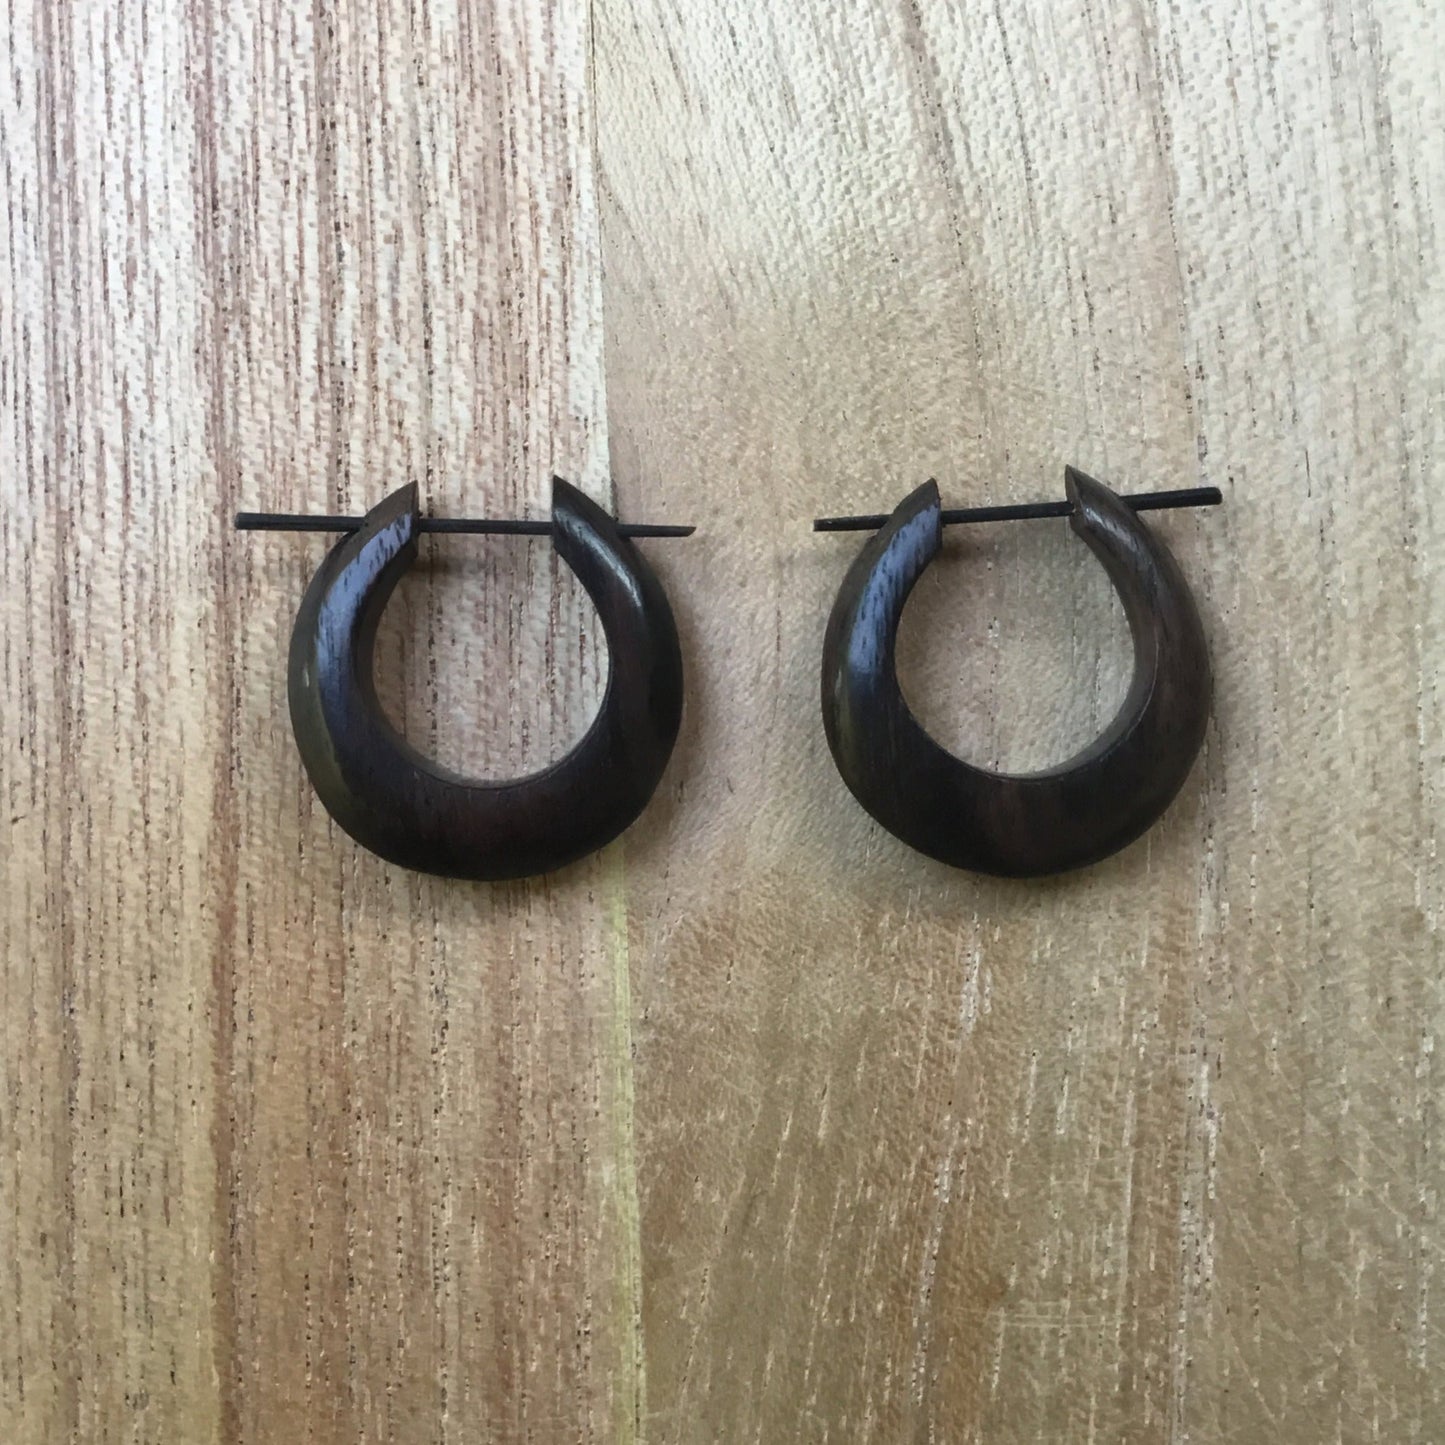 Hoop Earrings, 1 inches W x 1 inches L. Rosewood.